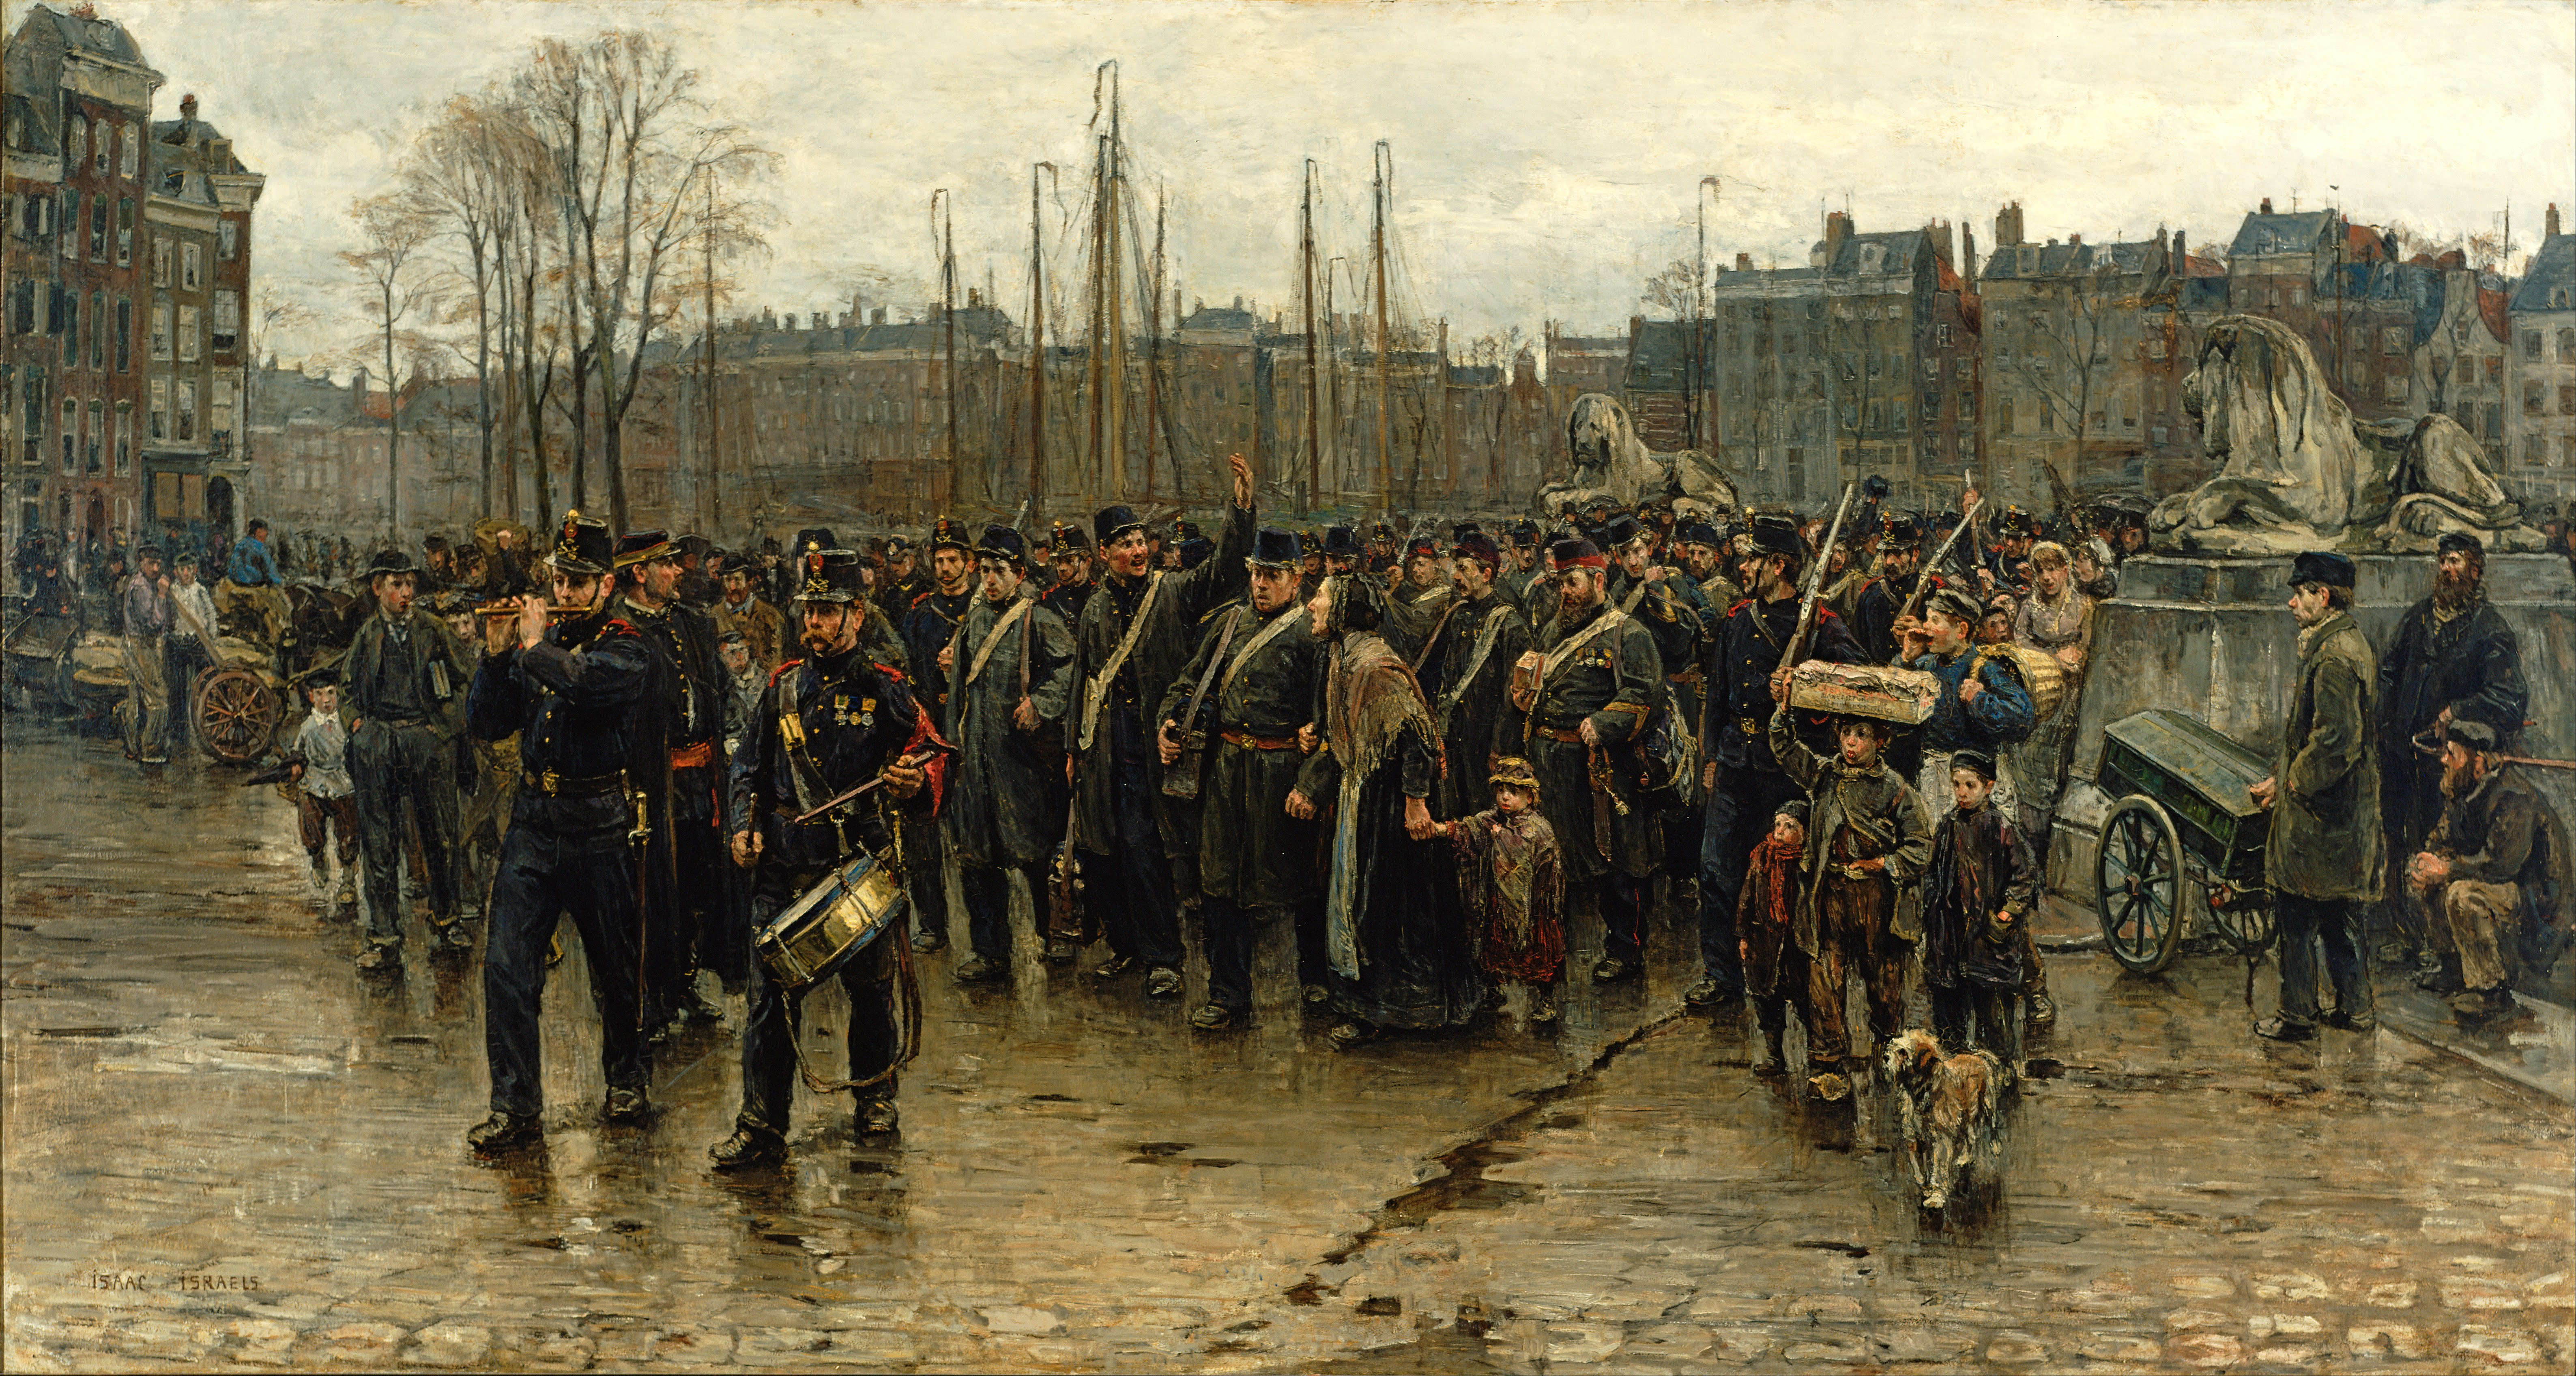 Isaac_Israels_-_Transport_of_colonial_soldiers_-_Google_Art_Project.jpg